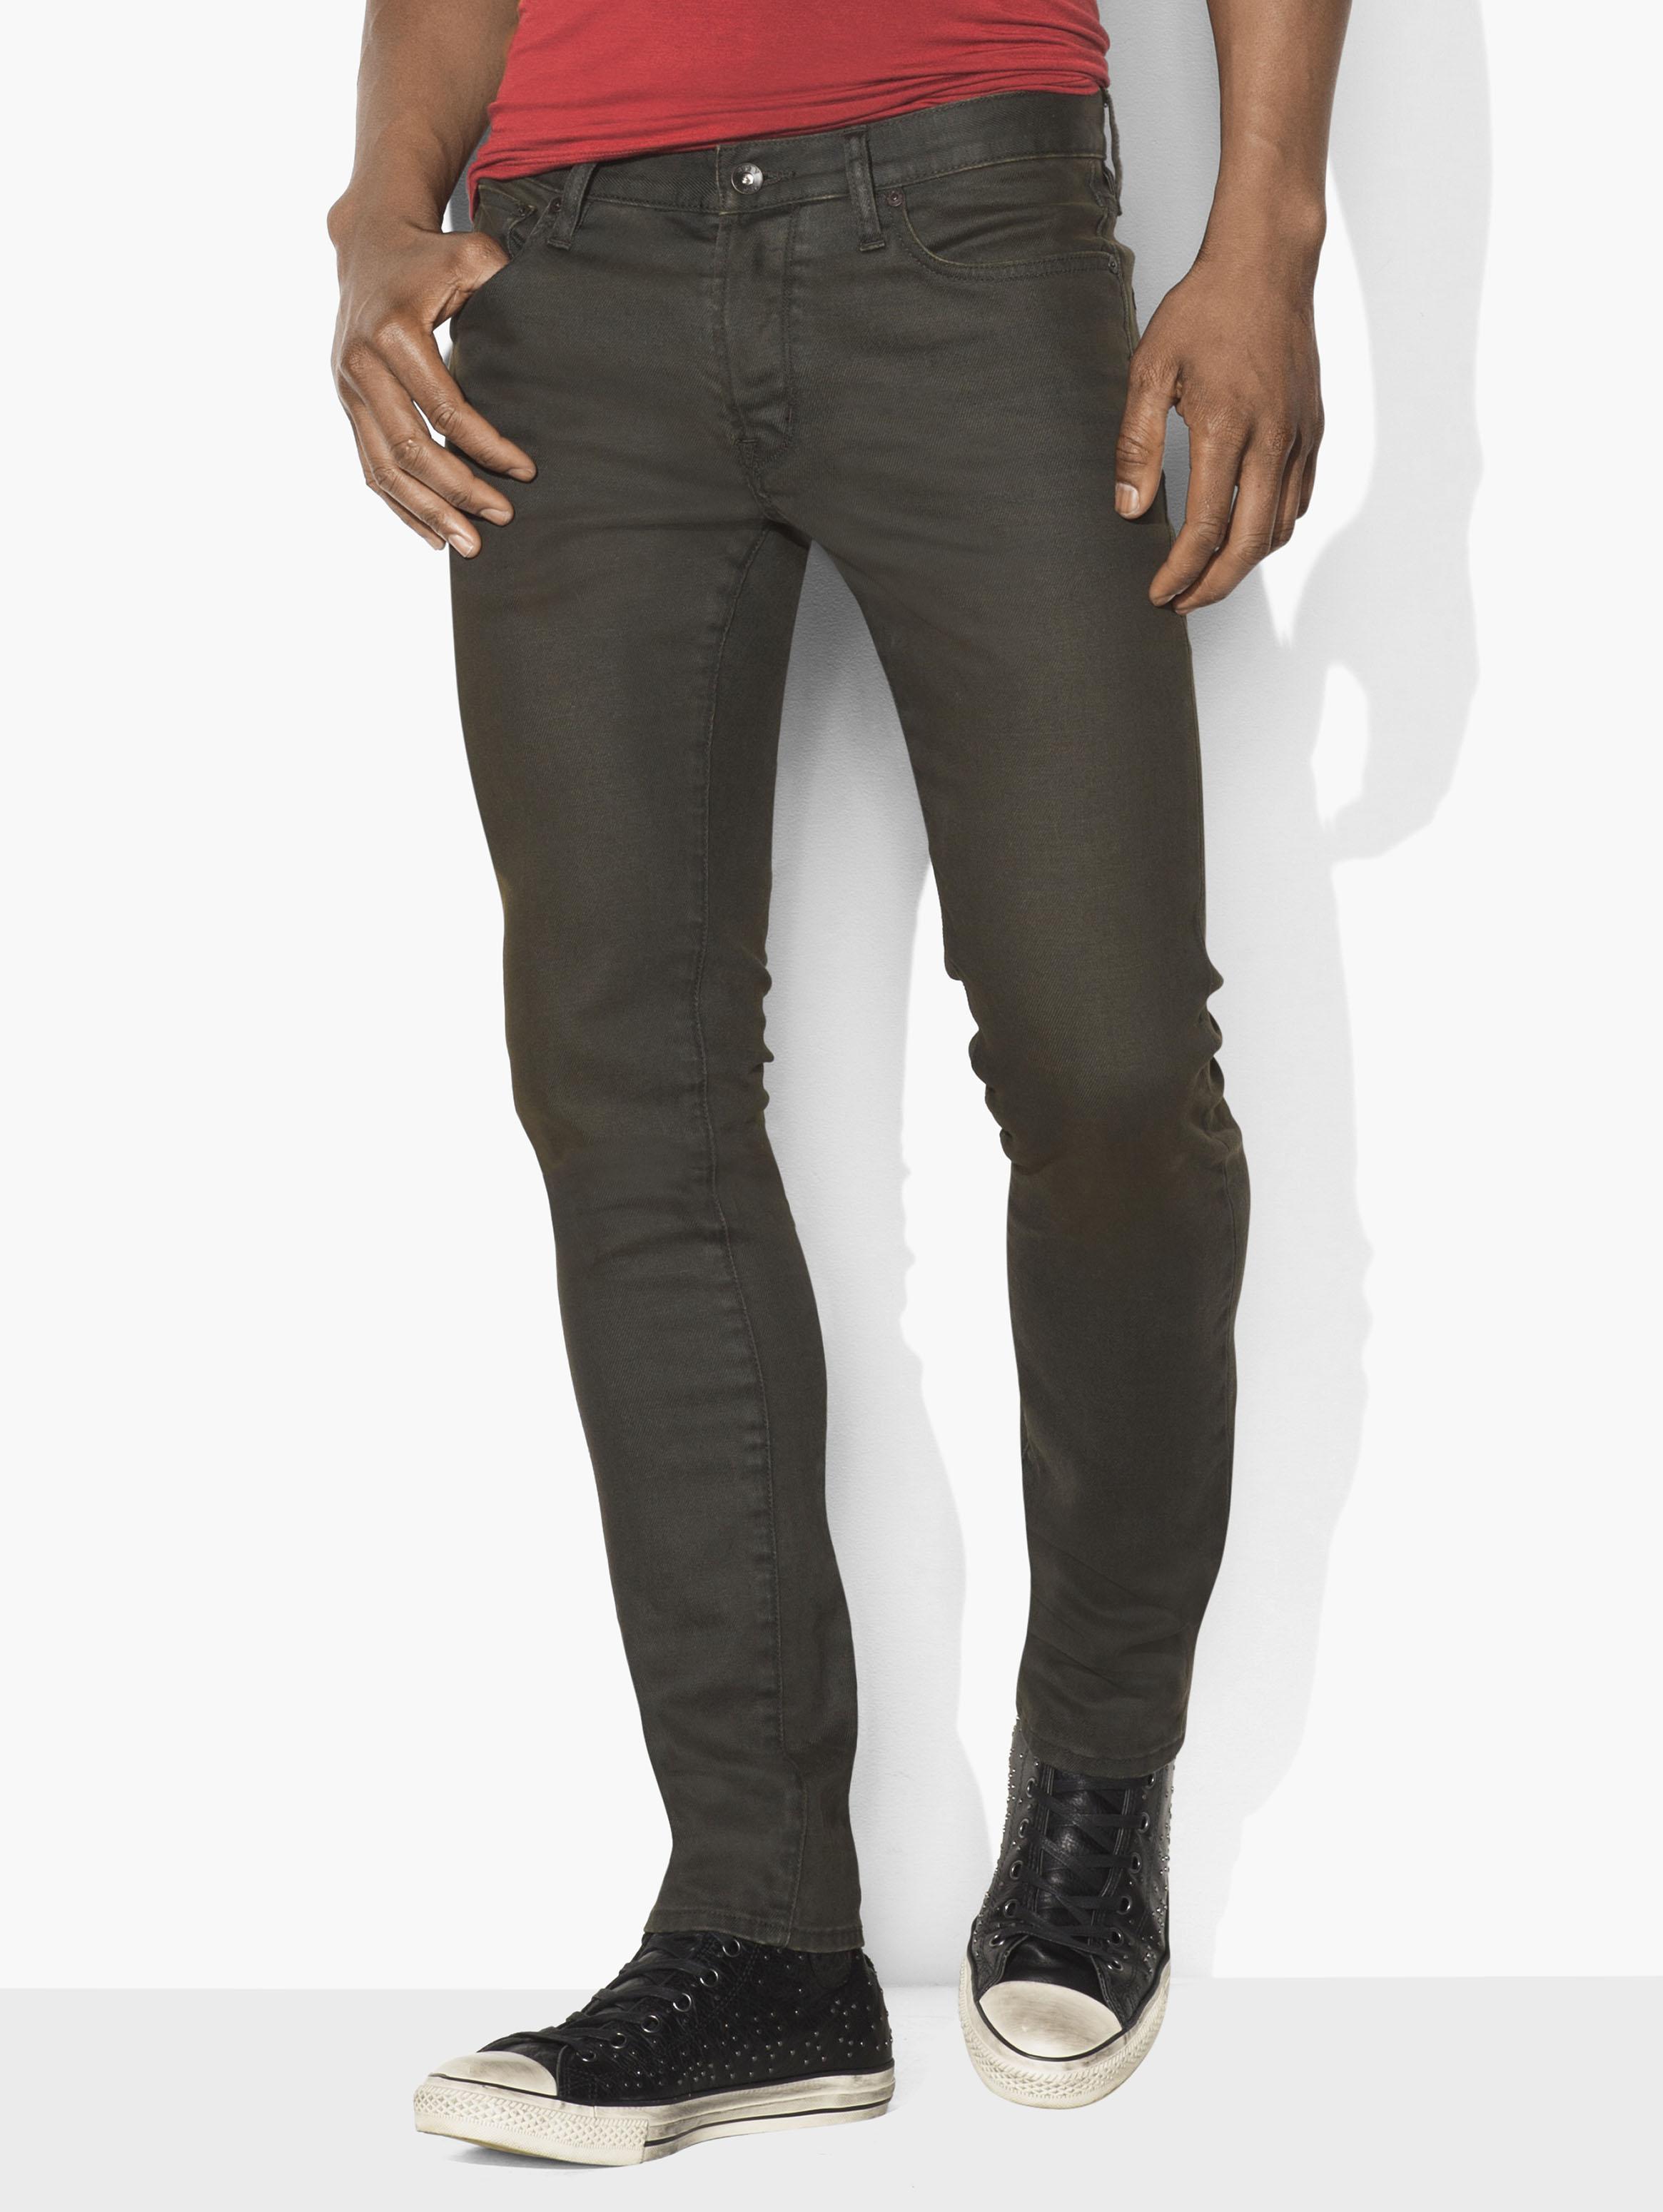 Wight Coated Stretch Jean image number 1